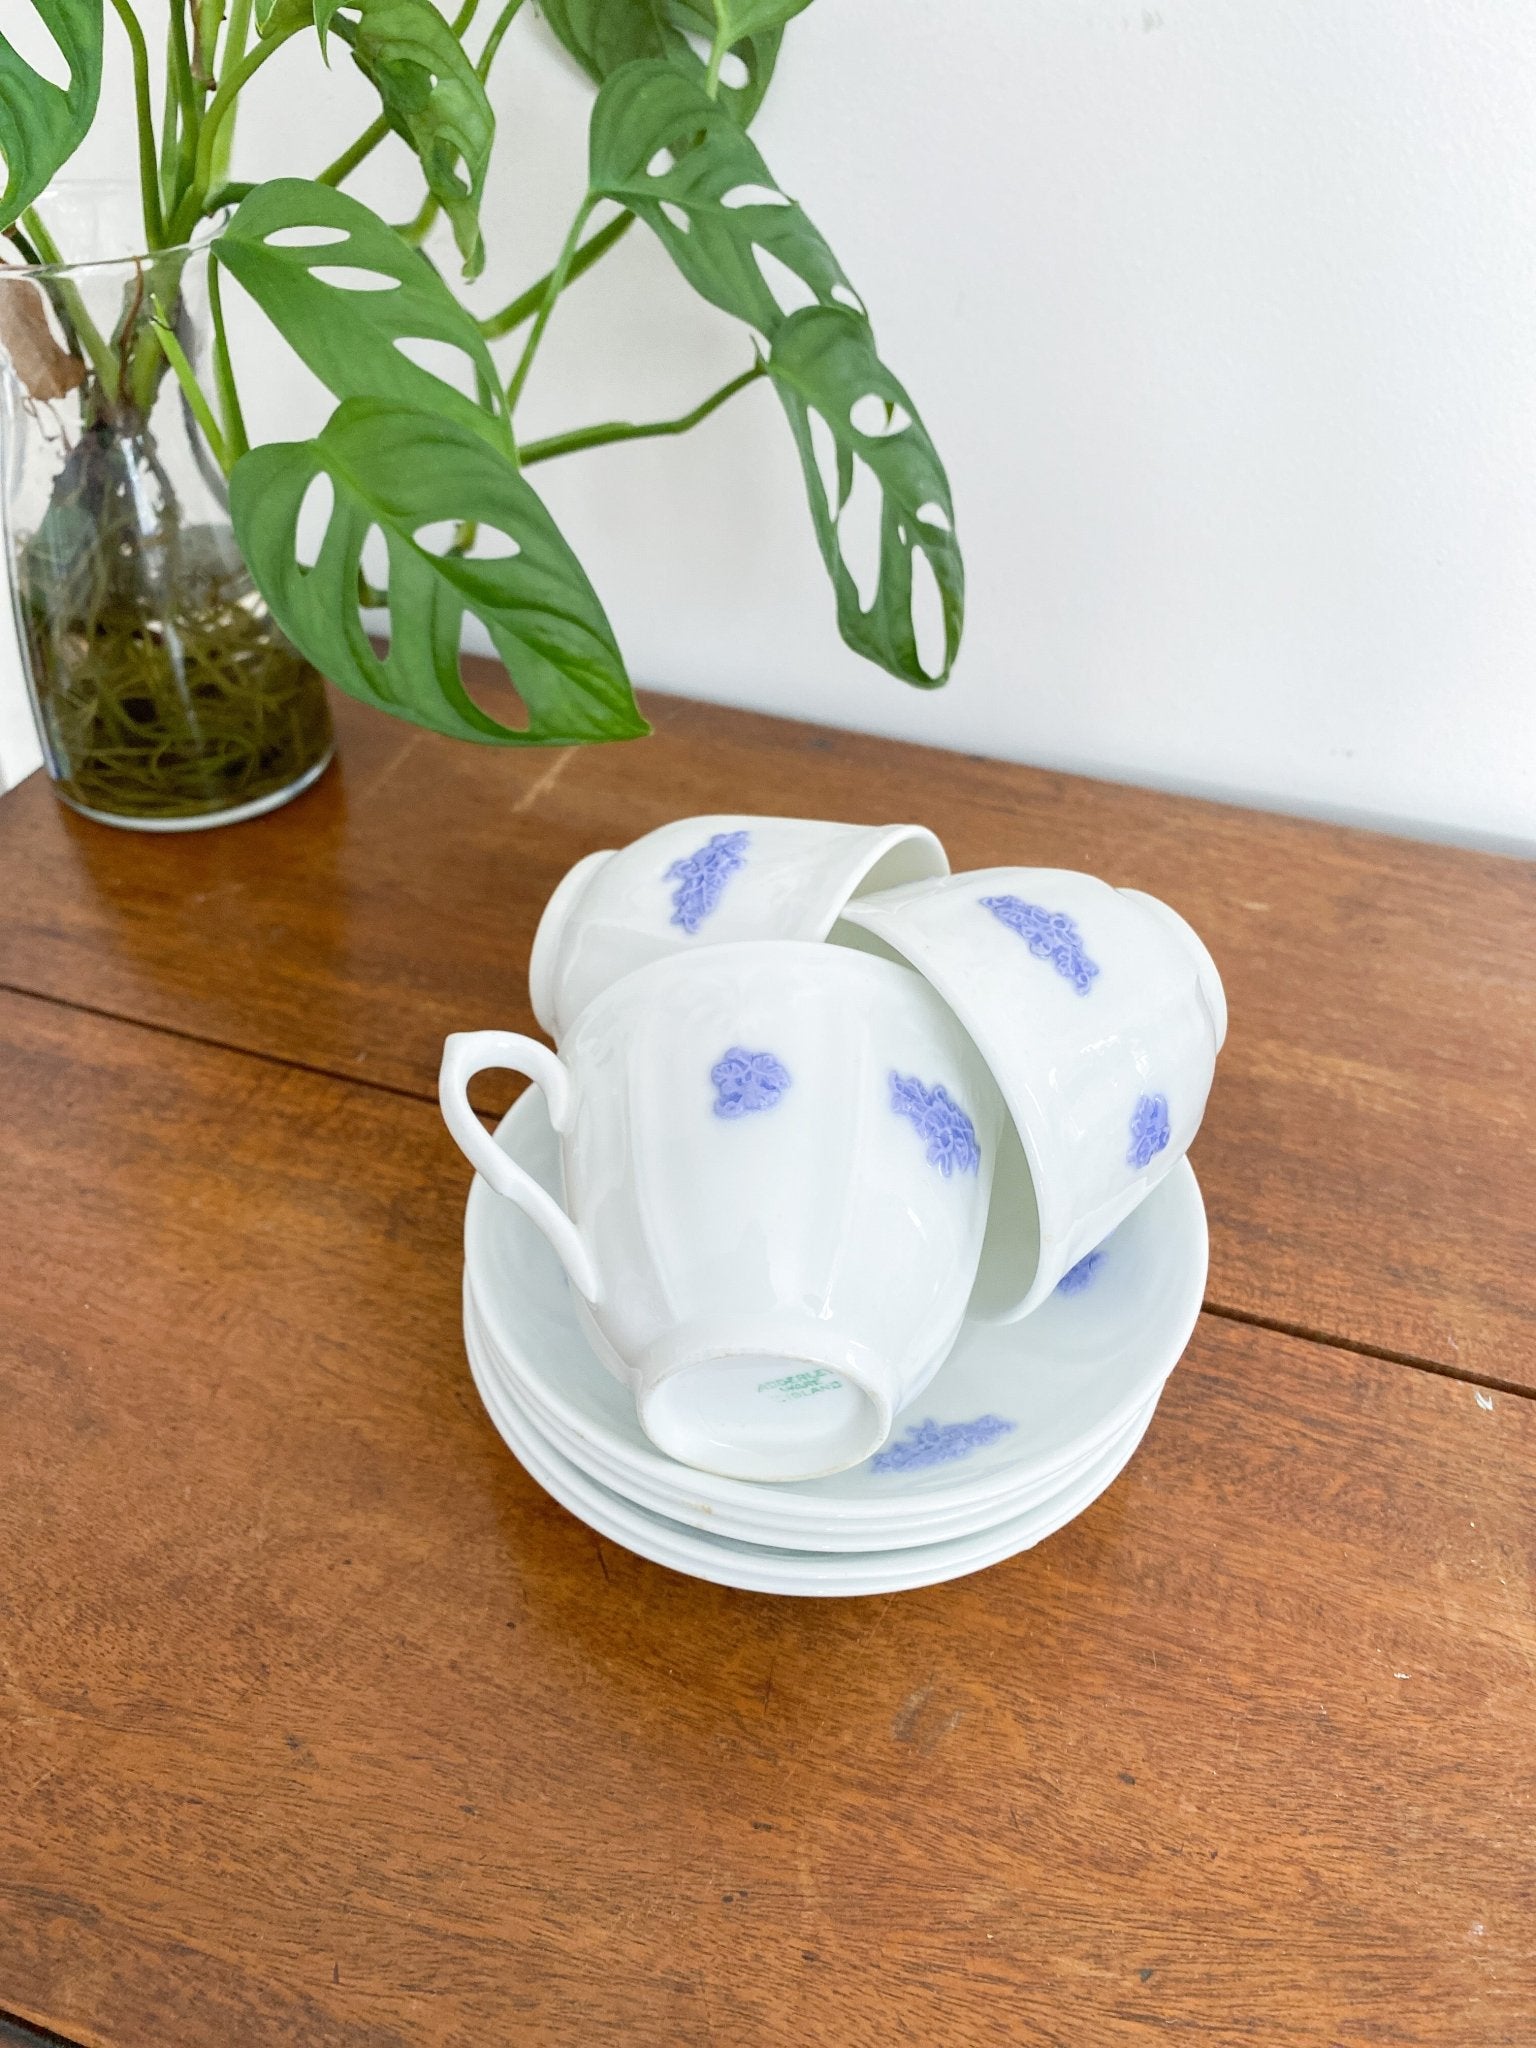 There are three teacups stacked on the saucers within eachother on a wooden table. The teacups are all upright but the handle is facing separate directions. The teacups are on the saucers and show the blue or violet colours.